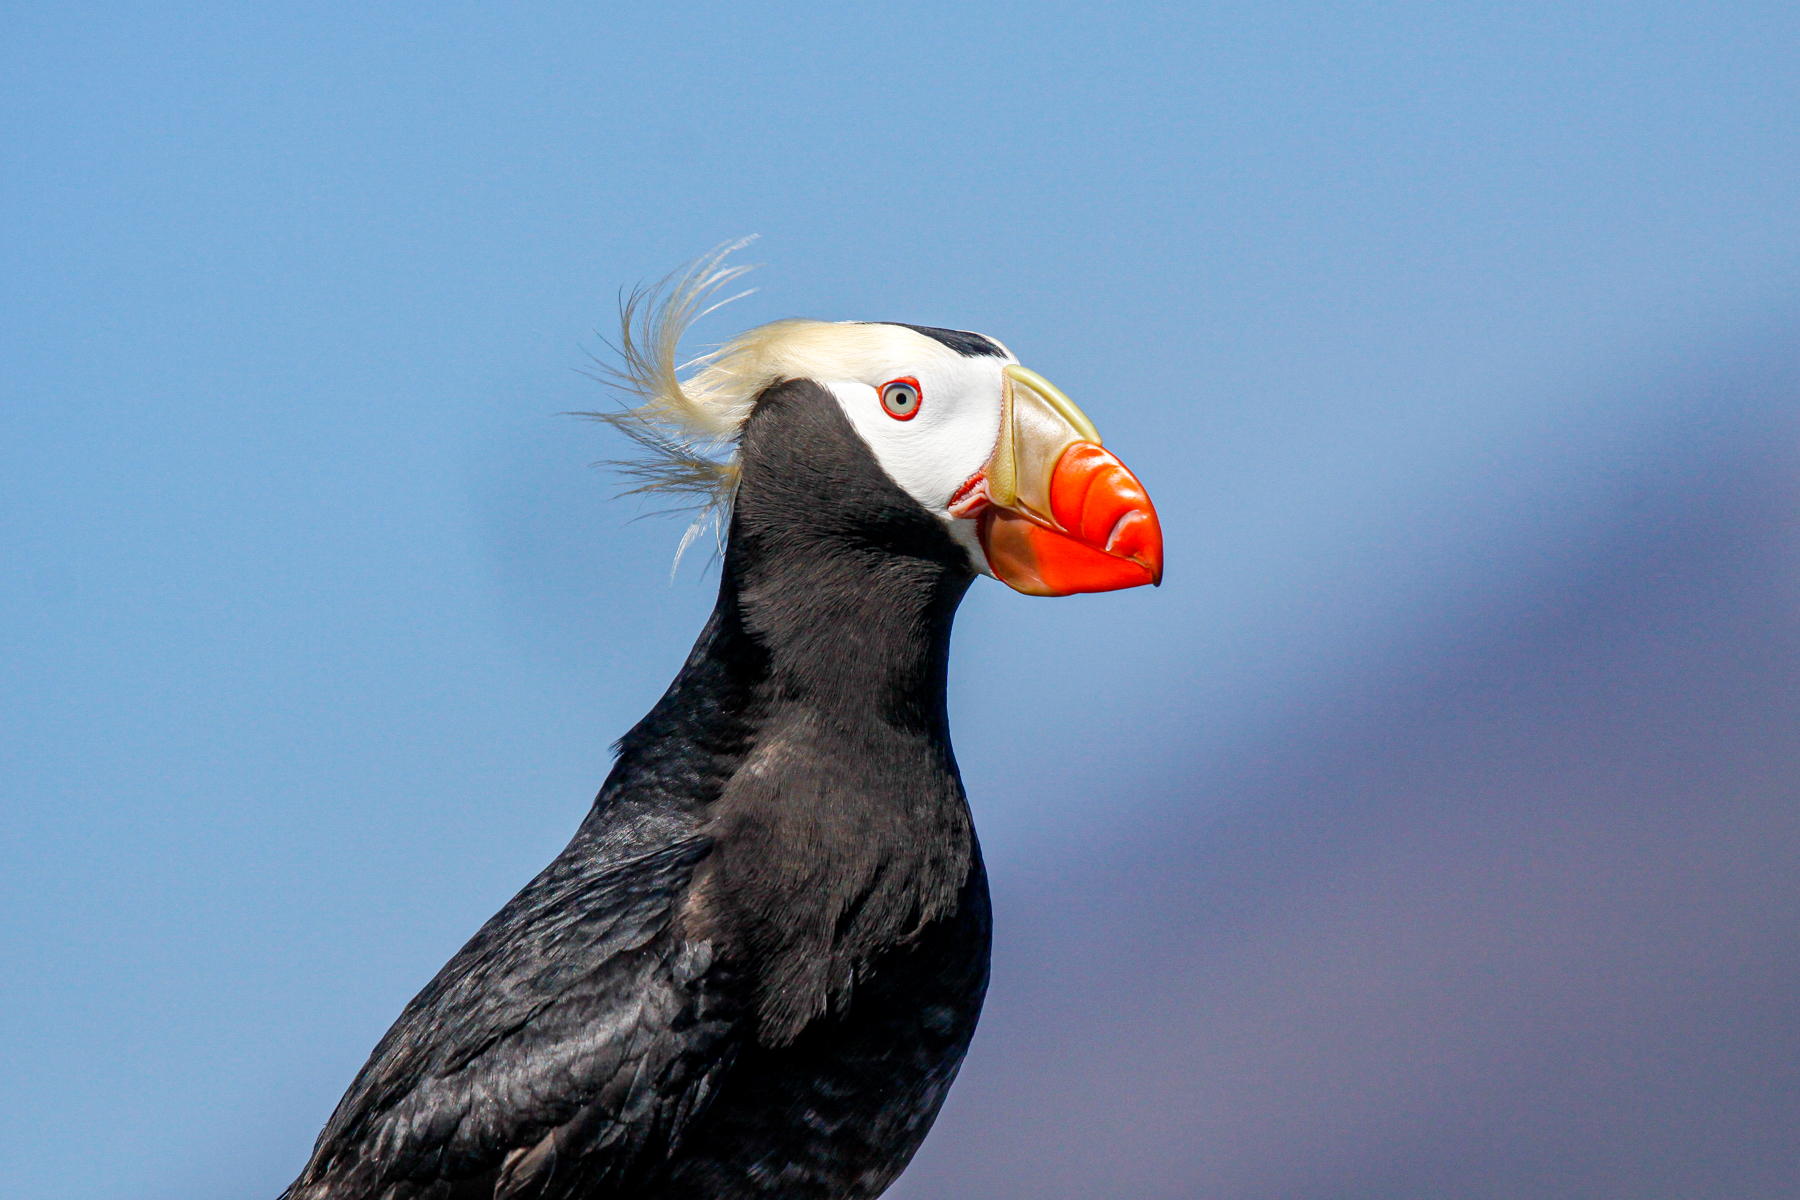 Tufted Puffin is a perennial favourite and there is no better place for them than the Kuril Islands (image by Mark Beaman)